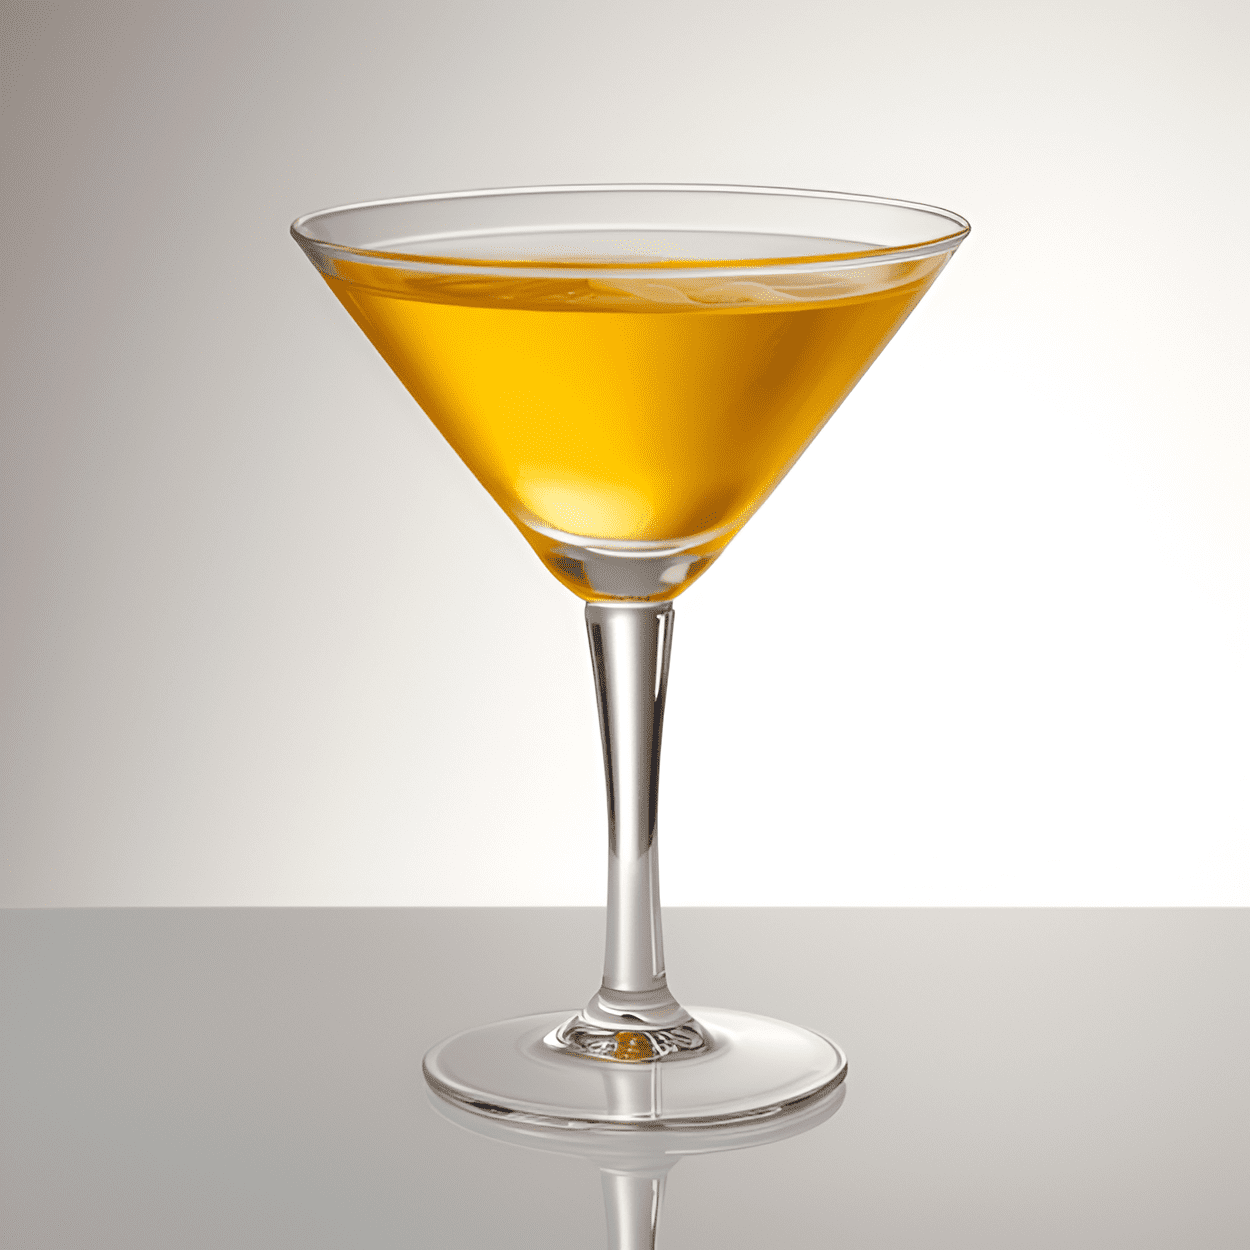 Boxcar Cocktail Recipe - The Boxcar cocktail is a delightful balance of sweet and sour. The bourbon provides a strong, robust flavor, while the lemon juice adds a tangy sourness. The triple sec and sugar rim add a sweet counterpoint to the sourness, creating a harmonious blend of flavors.